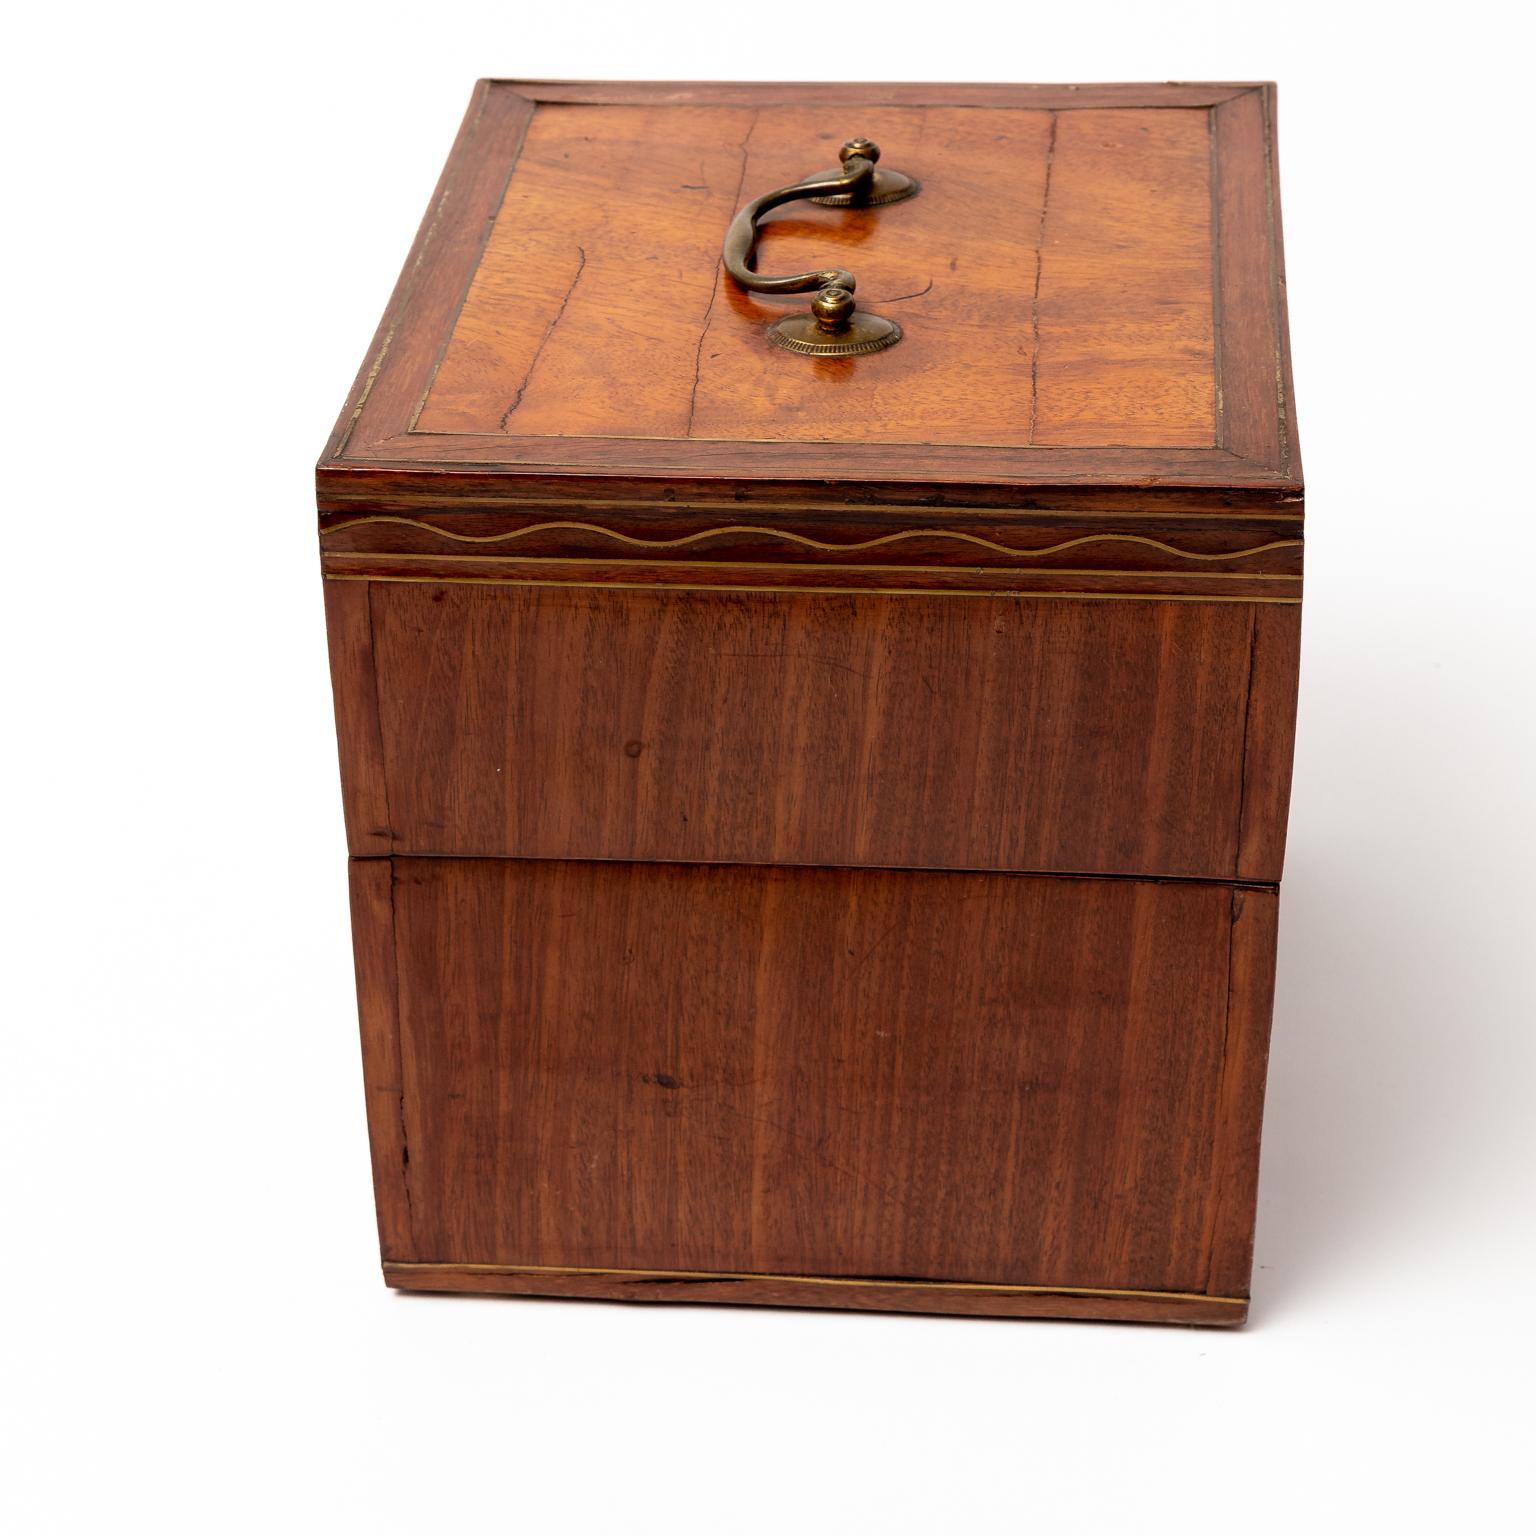 Circa 1790s near cube shaped tantalus cabinet box in the Hepplewhite style which retains four original bottles and three of four original glasses. The interior is also constructed with a square shaped mirror. The box's exterior features Mahogany